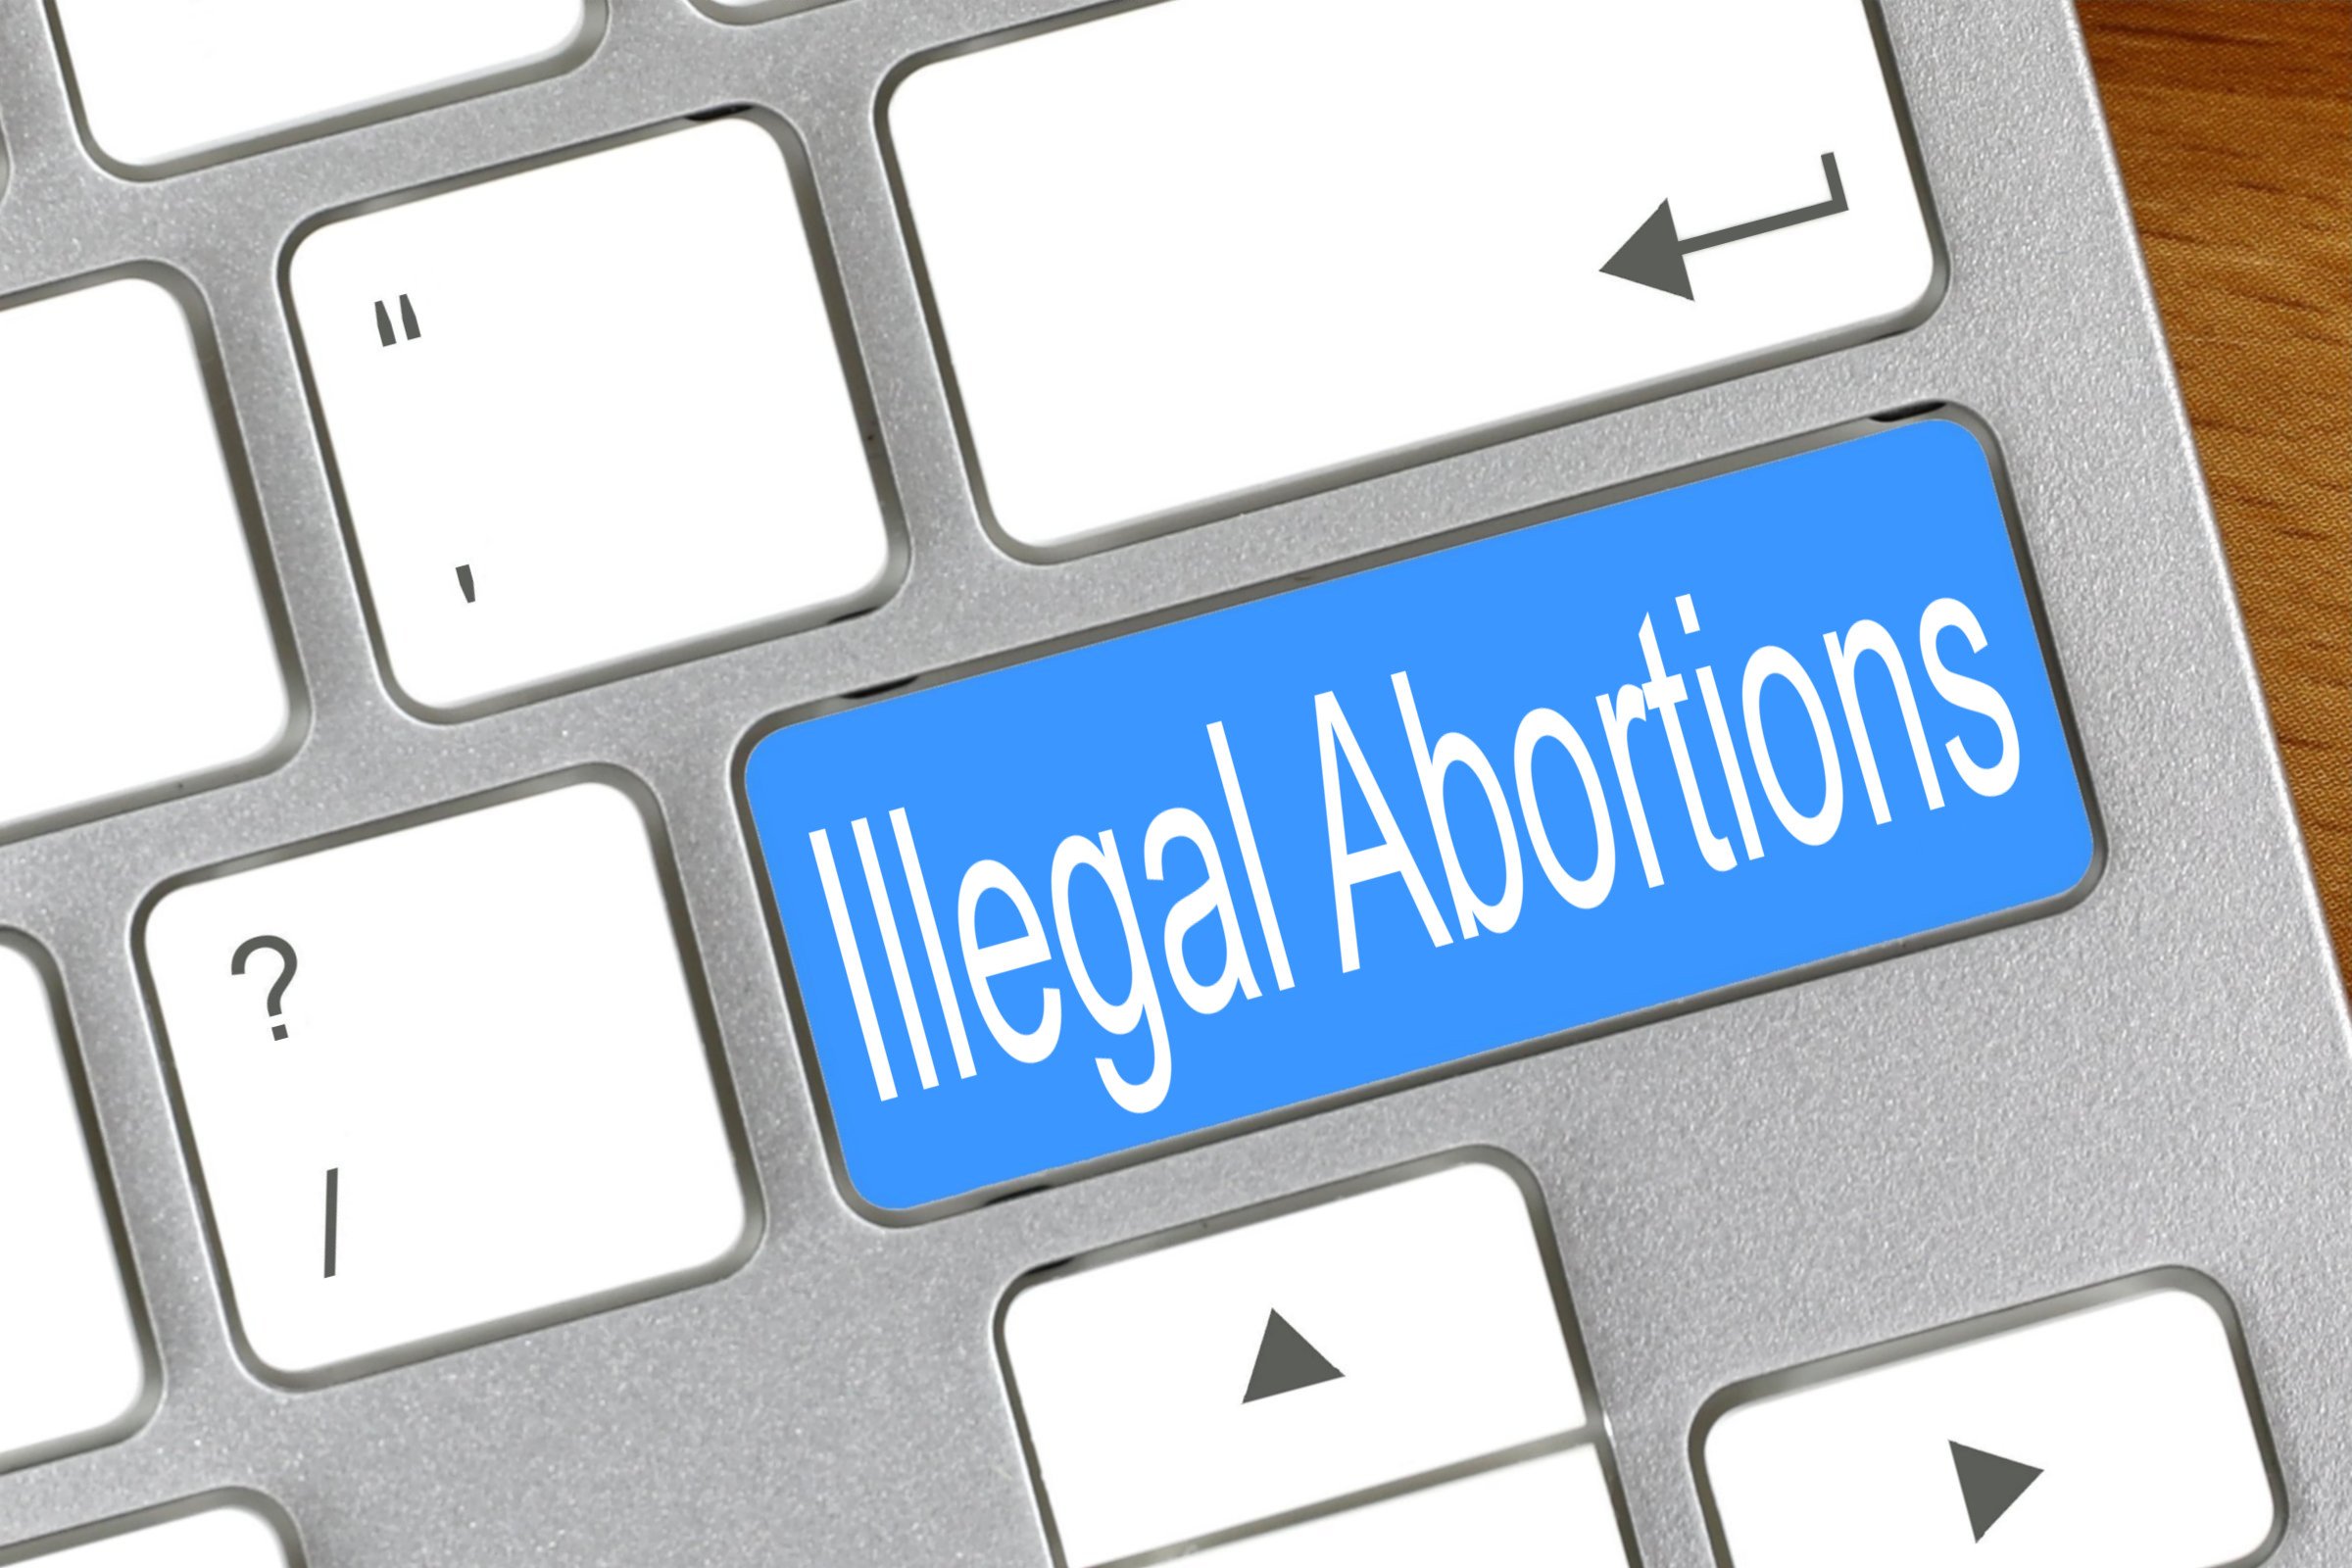 illegal abortions